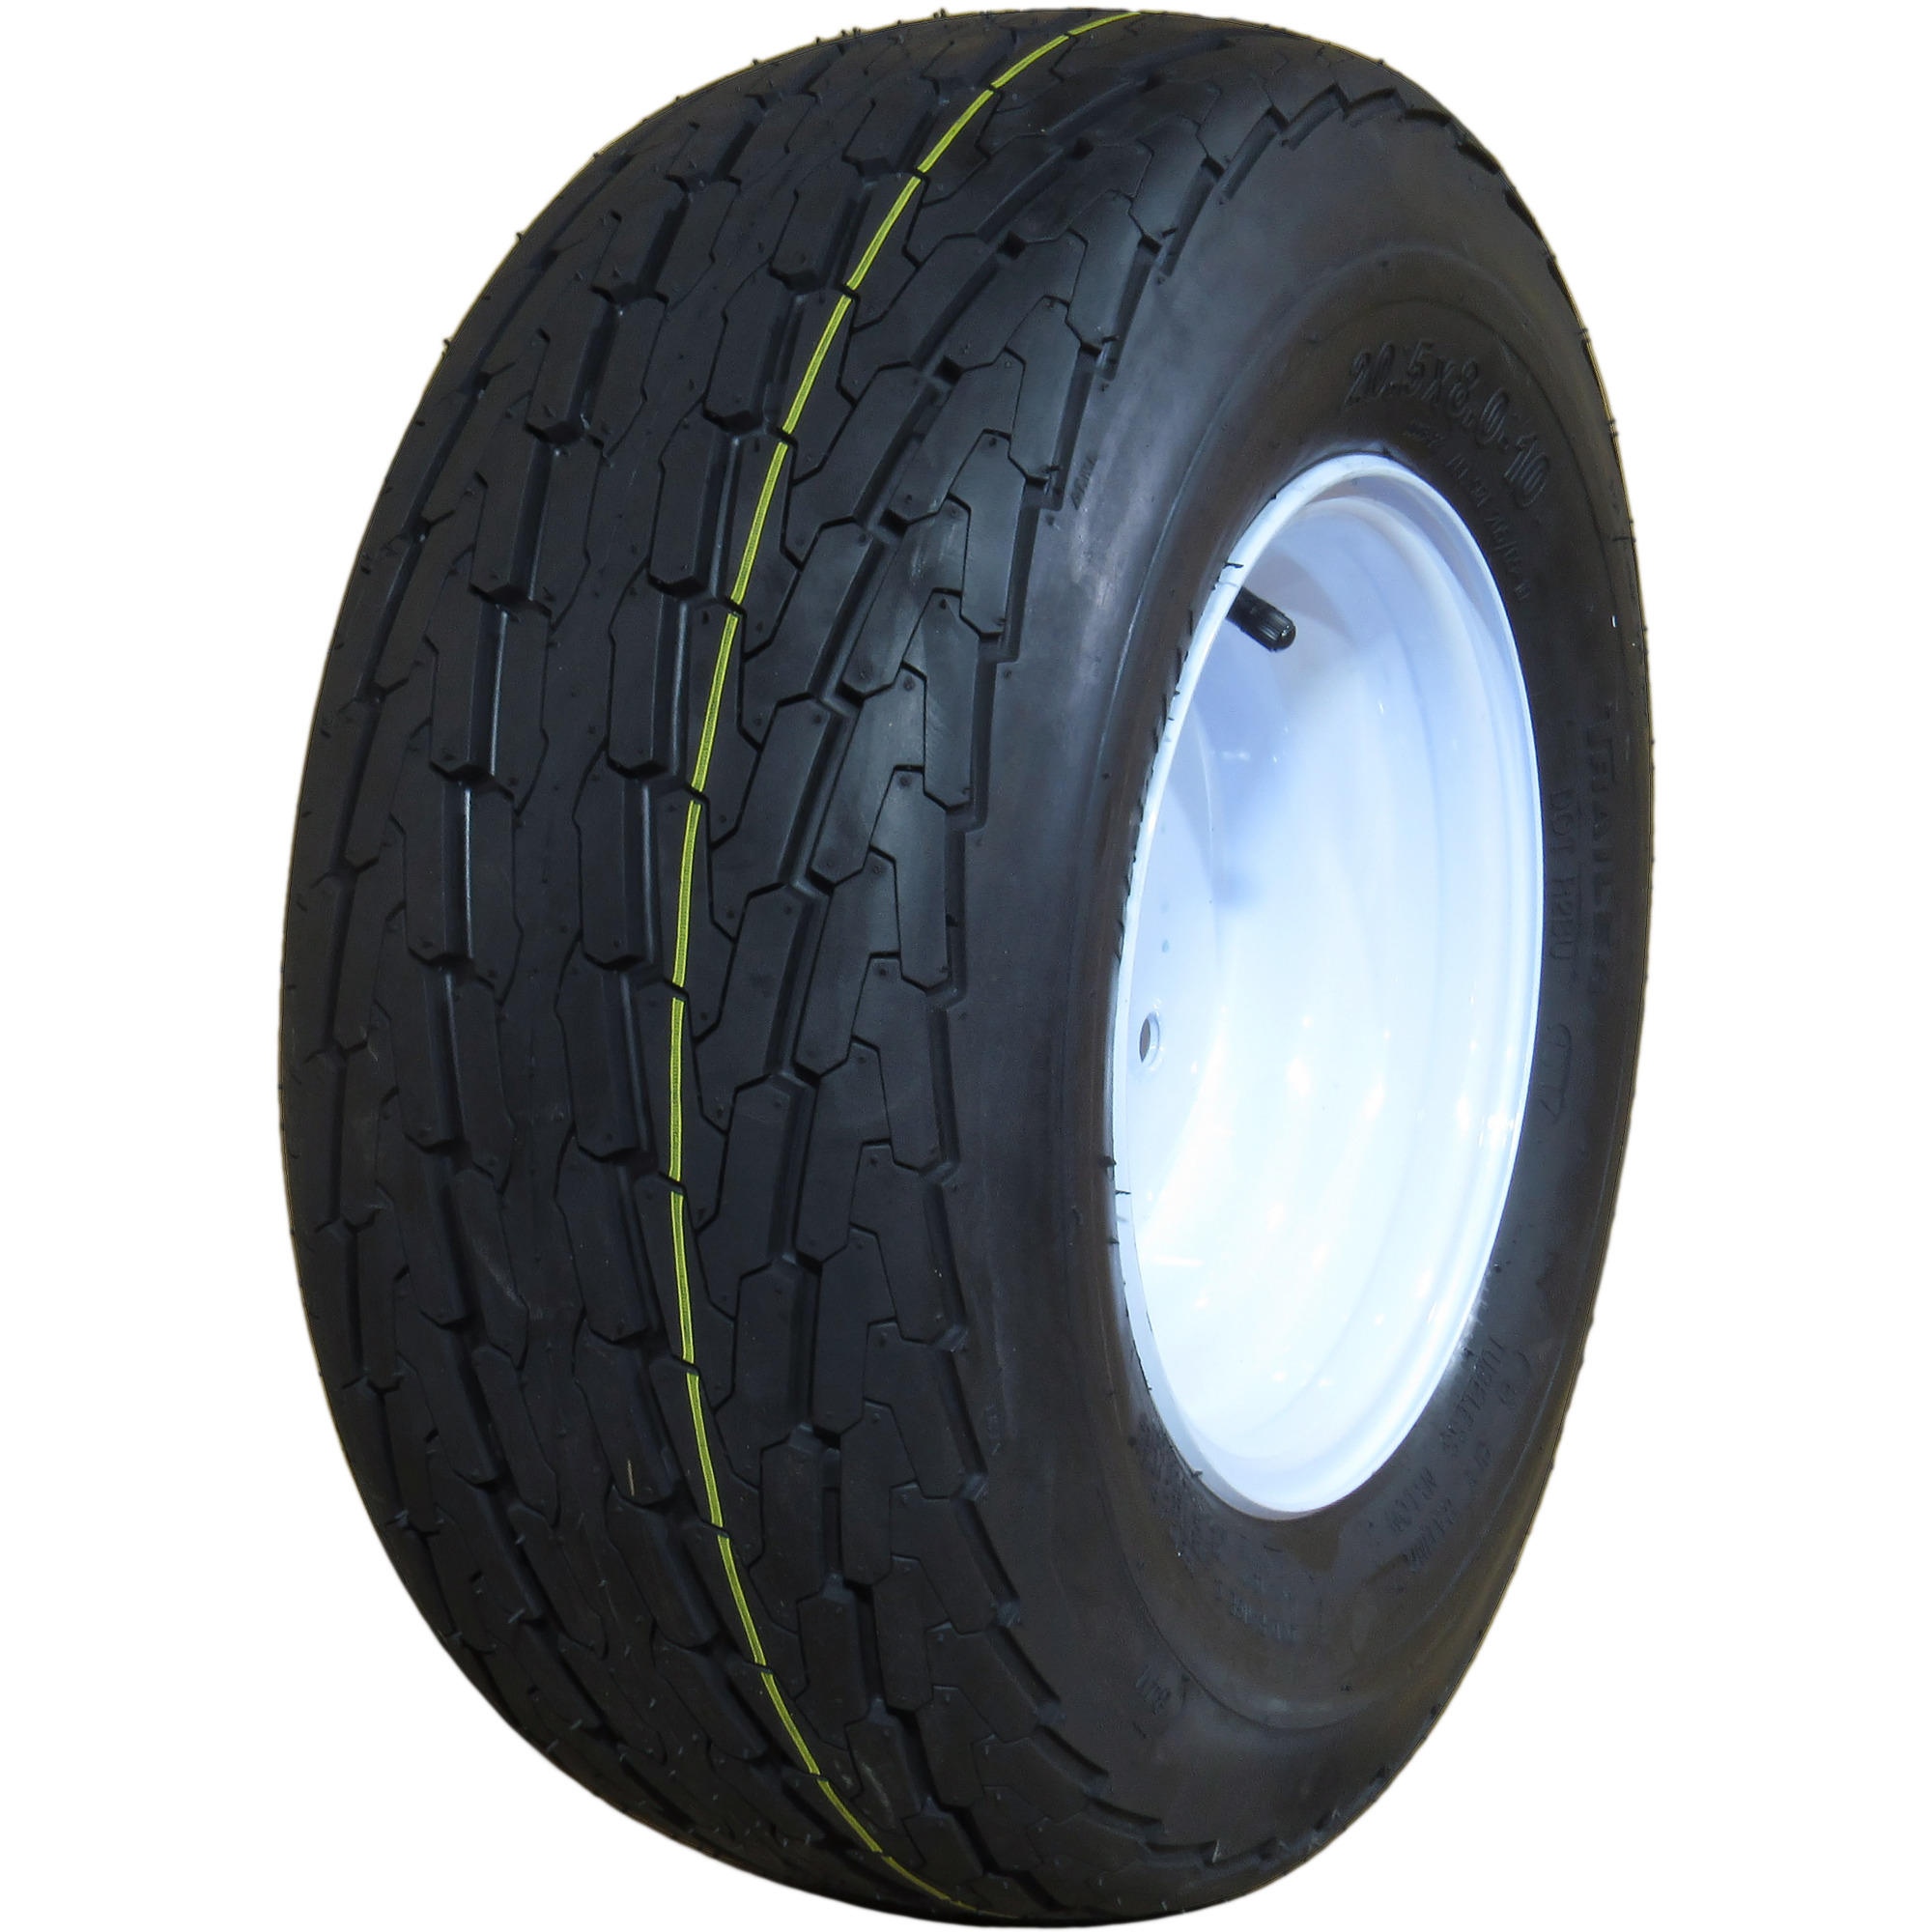 HI-RUN, Highway Trailer Tire Assembly, Bias-Ply, Tire Size 20.5X8.00-10 Load Range Rating C, Bolt Holes (qty.) 4 Model ASB1044